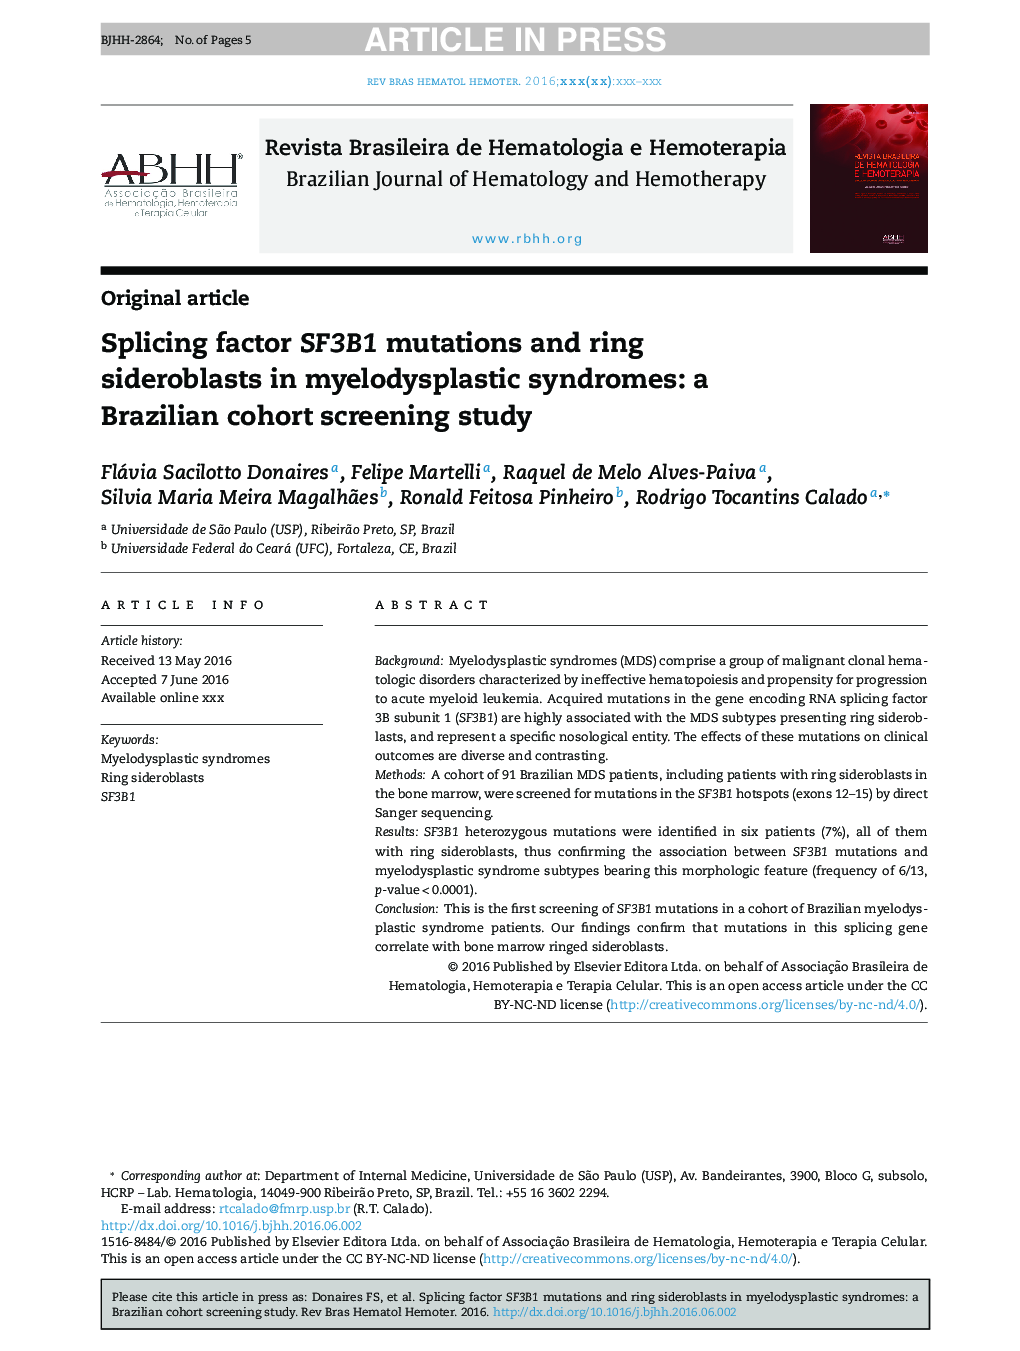 Splicing factor SF3B1 mutations and ring sideroblasts in myelodysplastic syndromes: a Brazilian cohort screening study